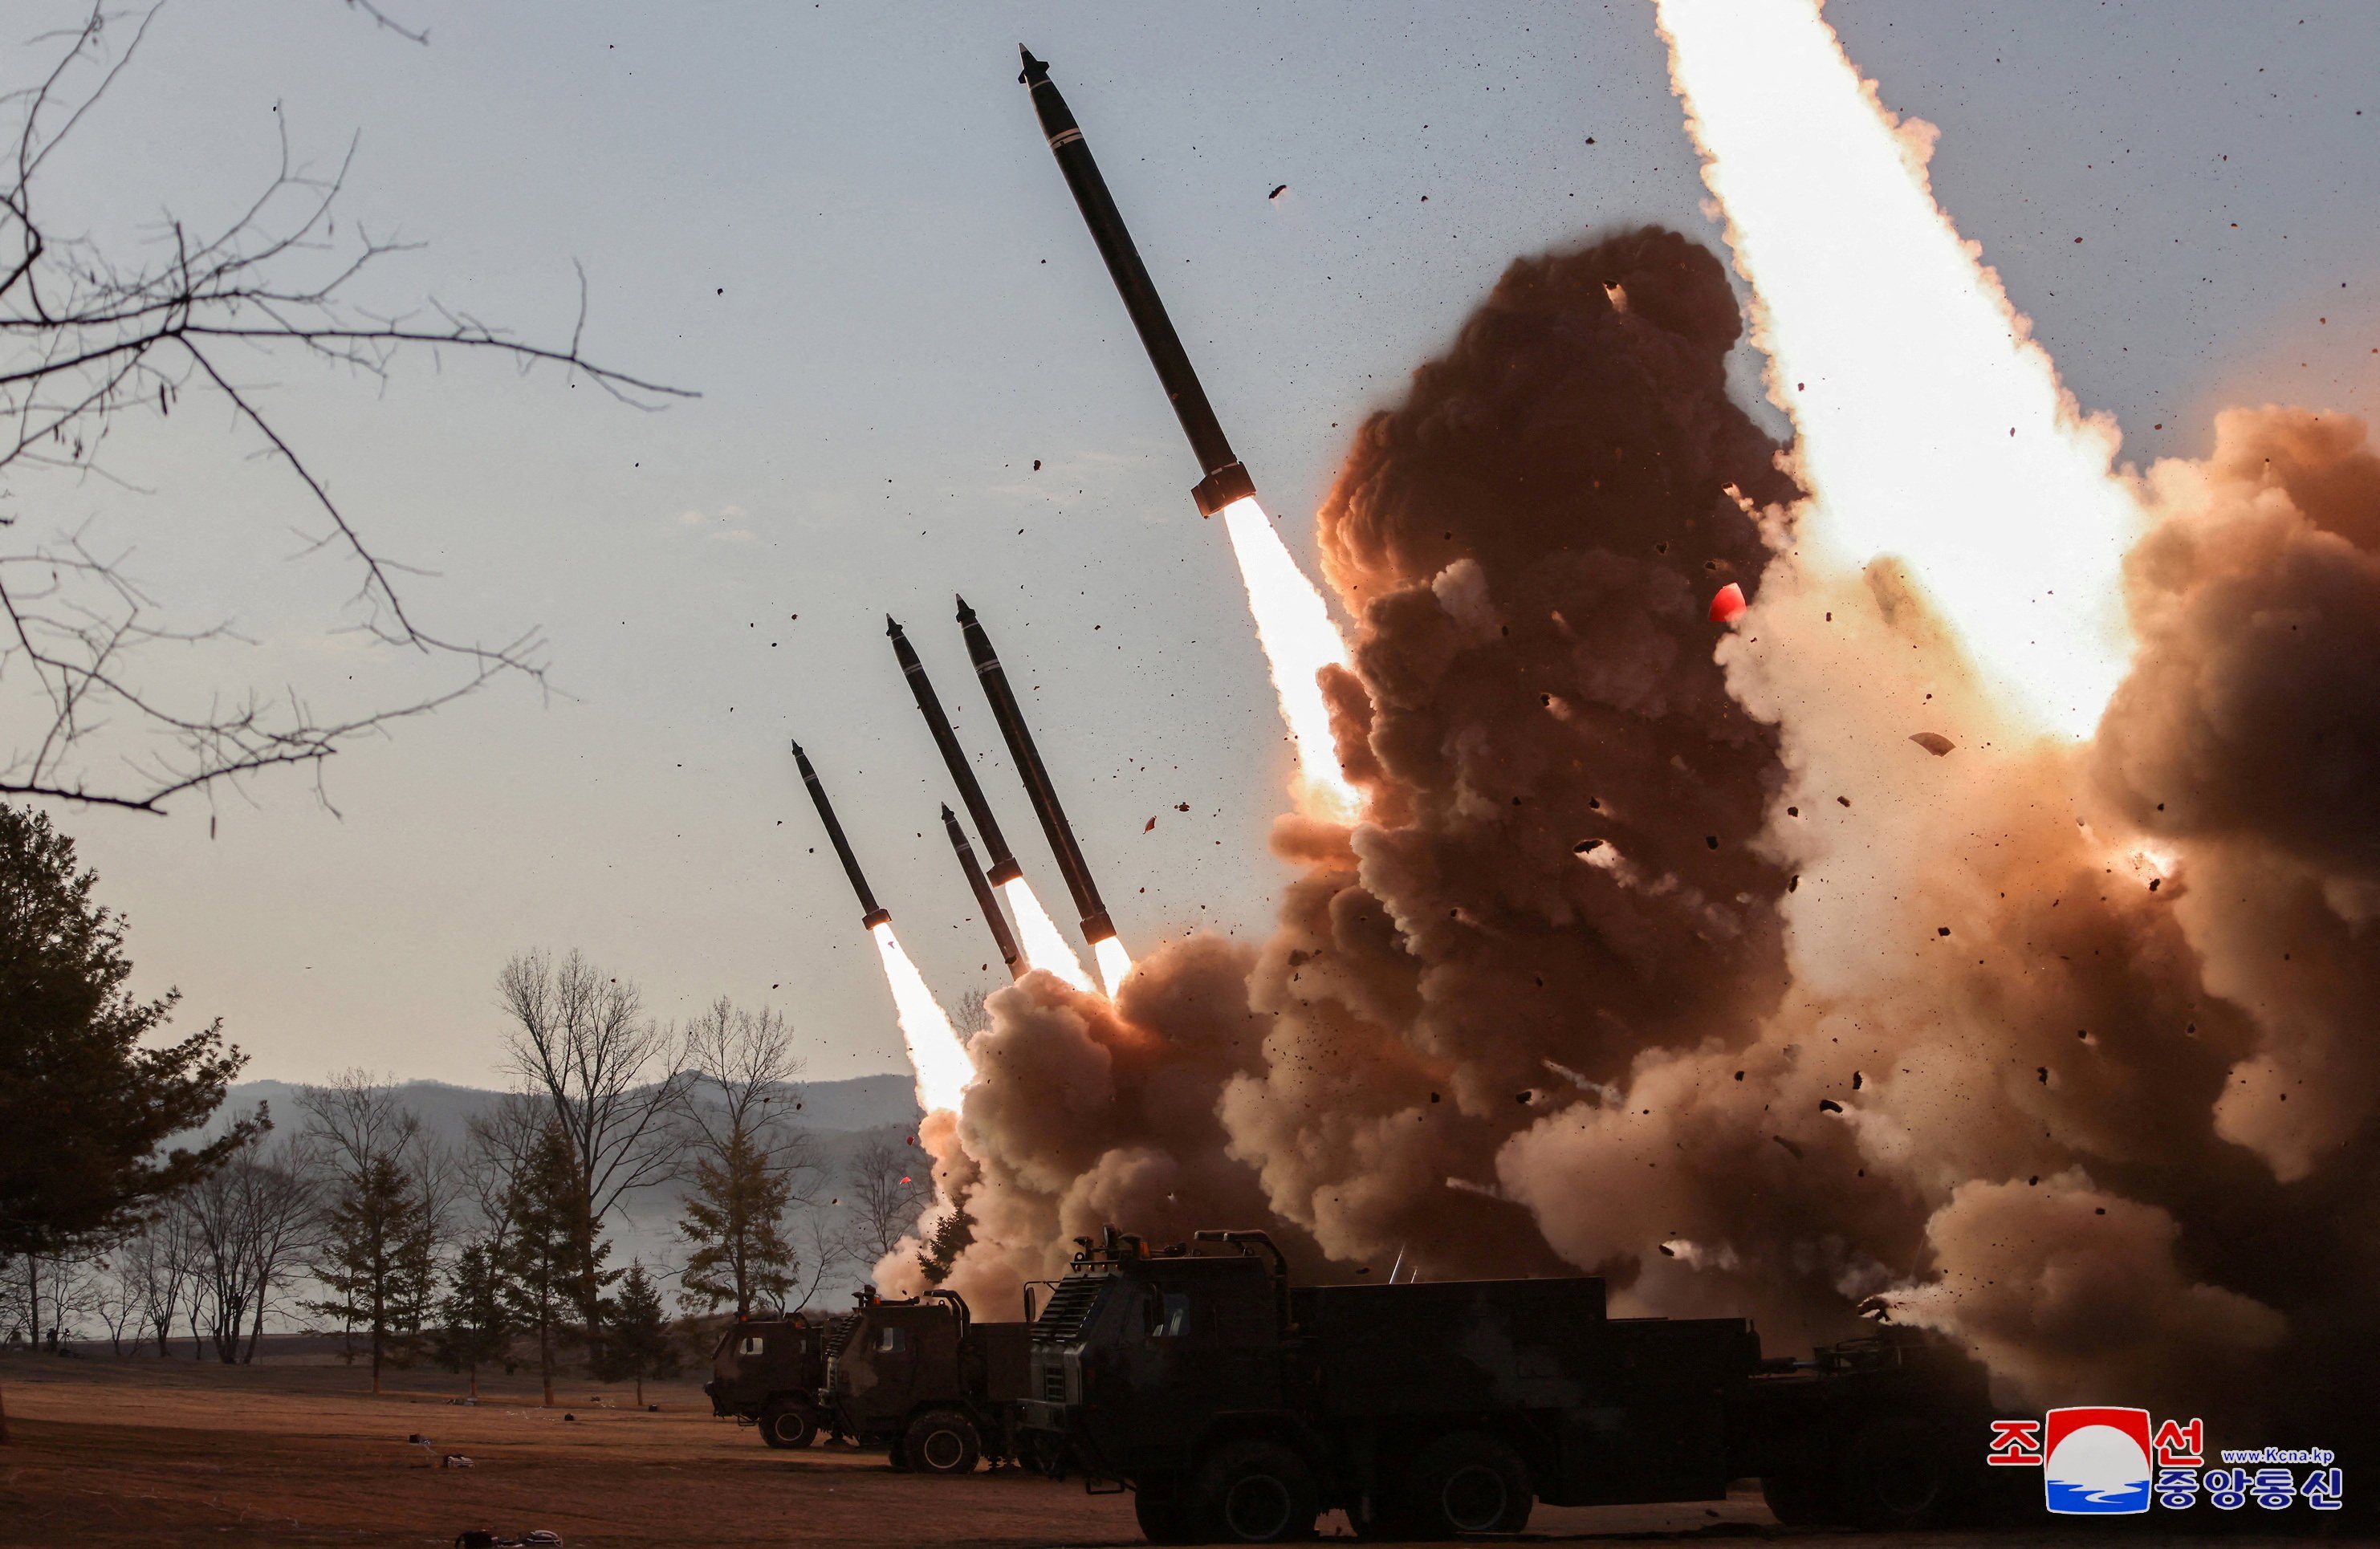 The North Korean military test-fires projectiles during a firing drill last month in this picture released on March 19 by Pyonygang’s official Korean Central News Agency. Photo: KCNA via Reuters